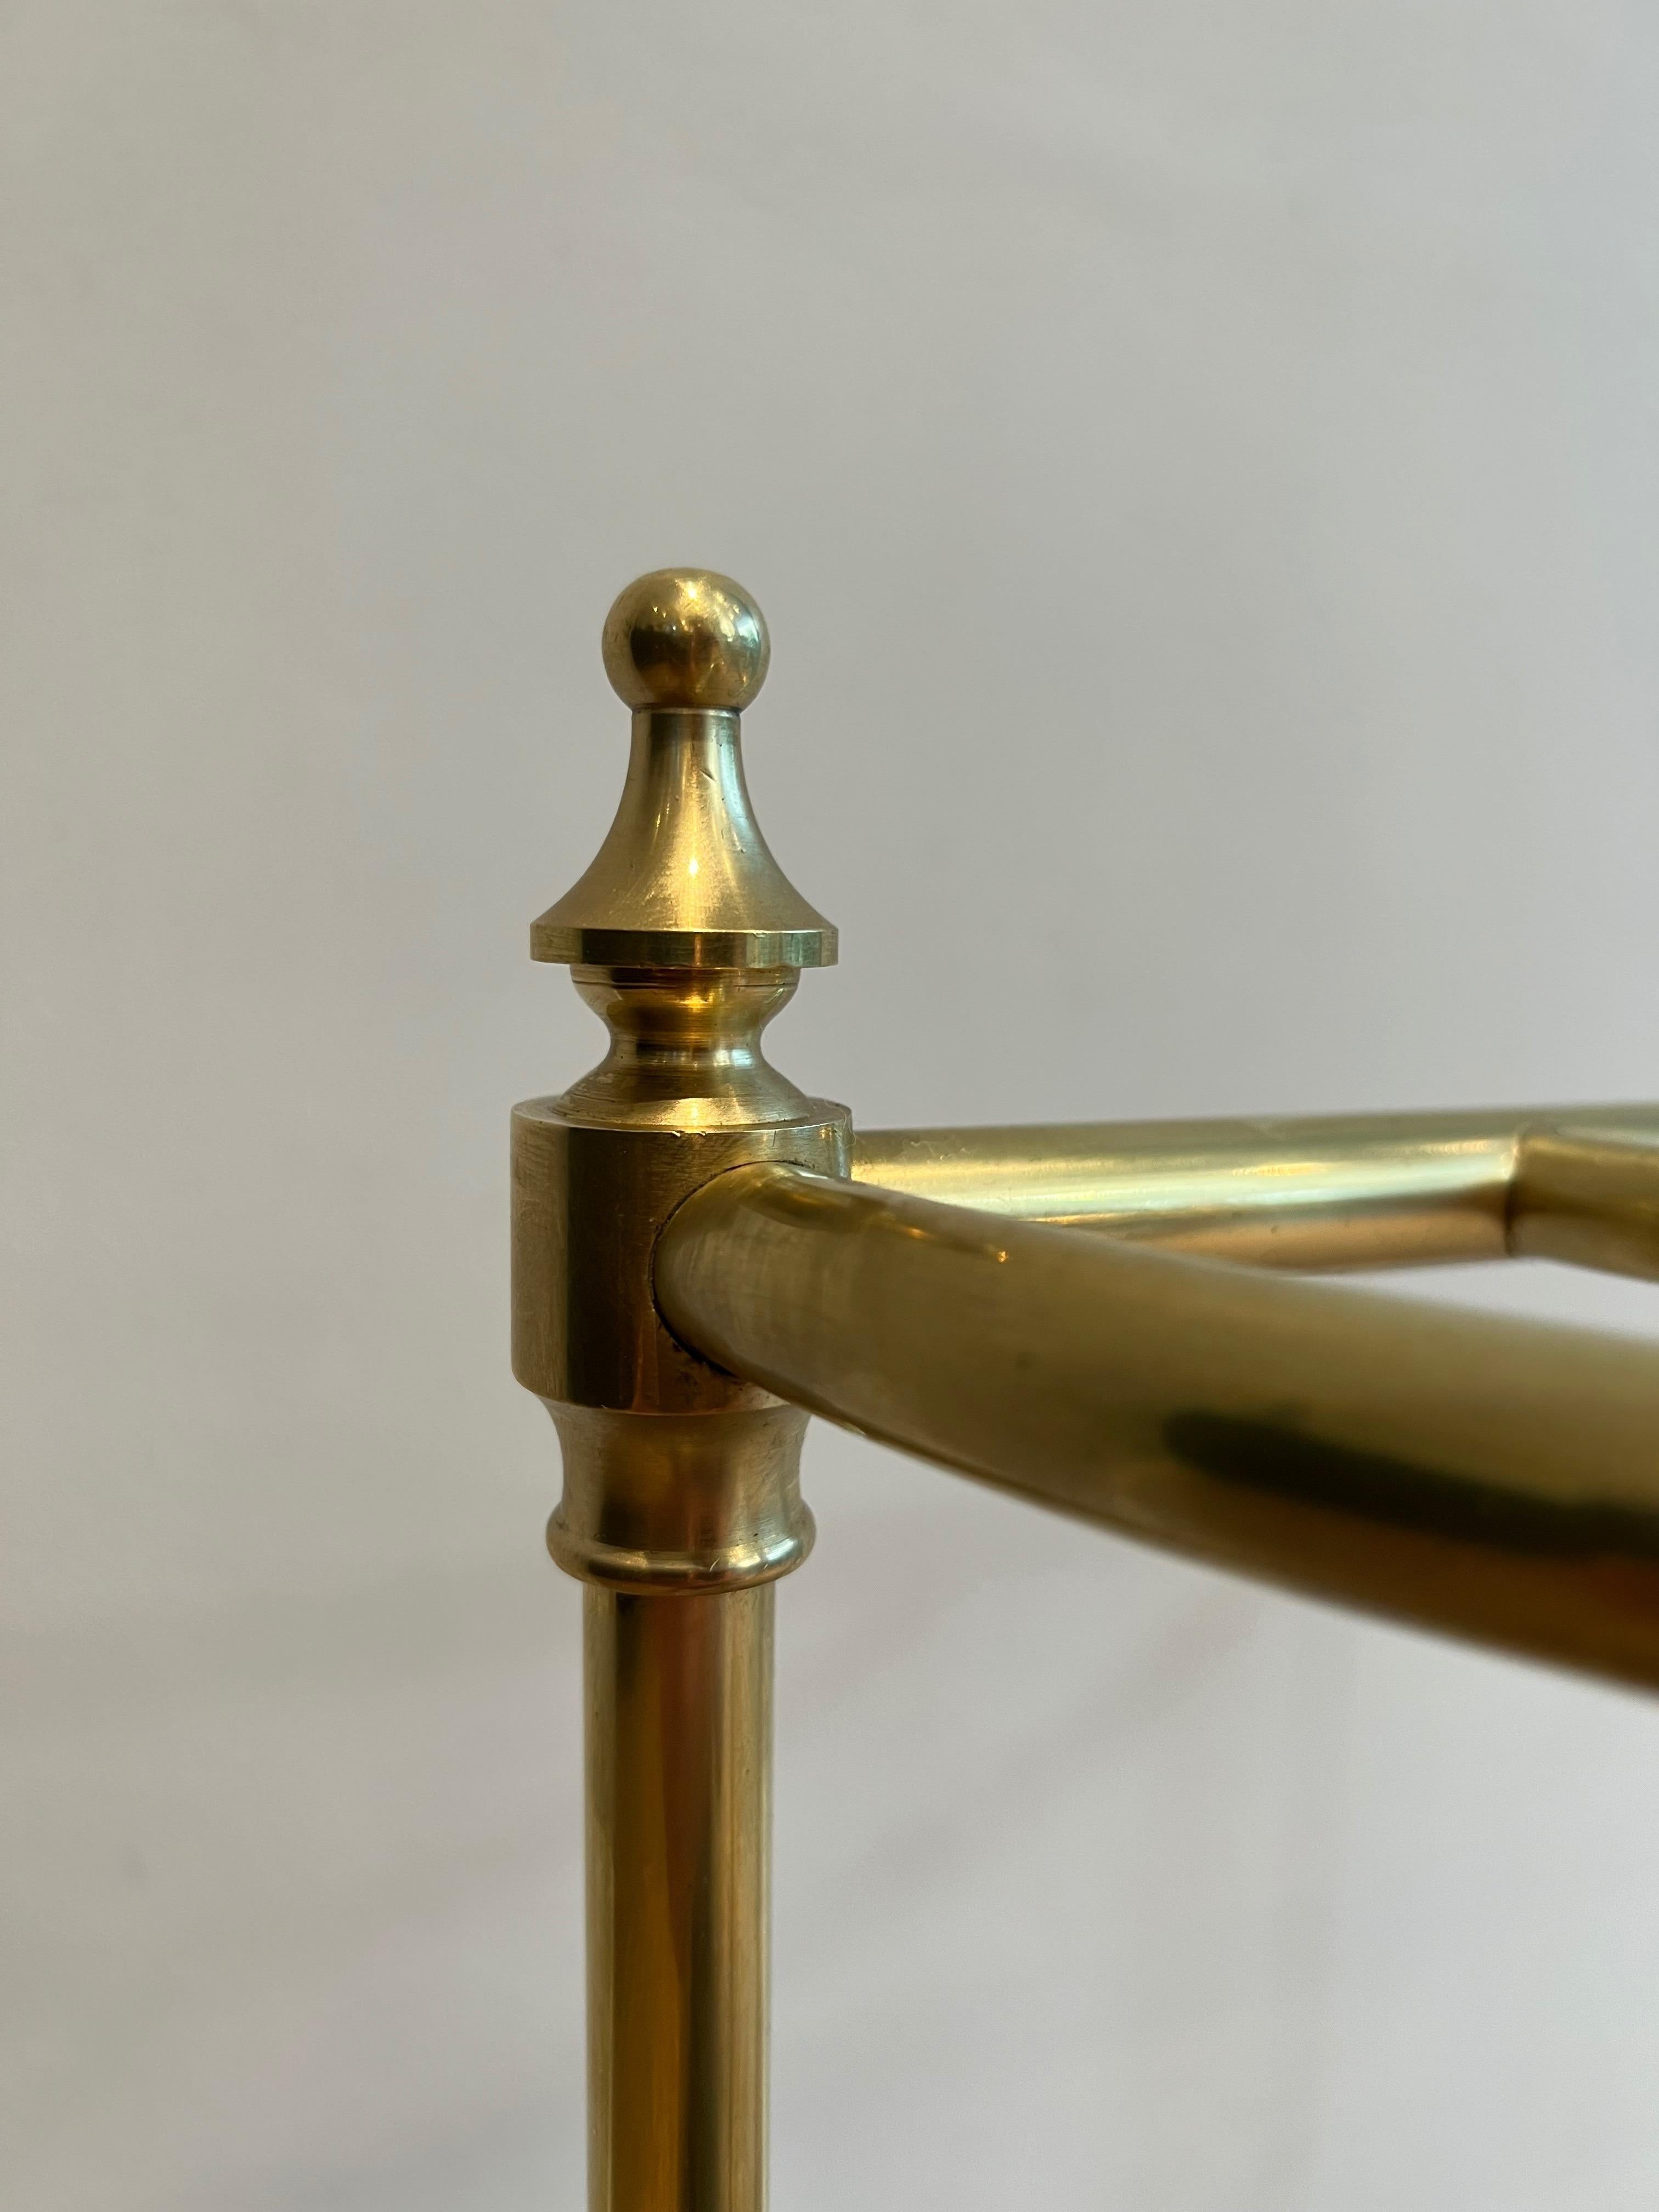 Rounded Brass Umbrella Stand In Good Condition For Sale In Marcq-en-Barœul, Hauts-de-France